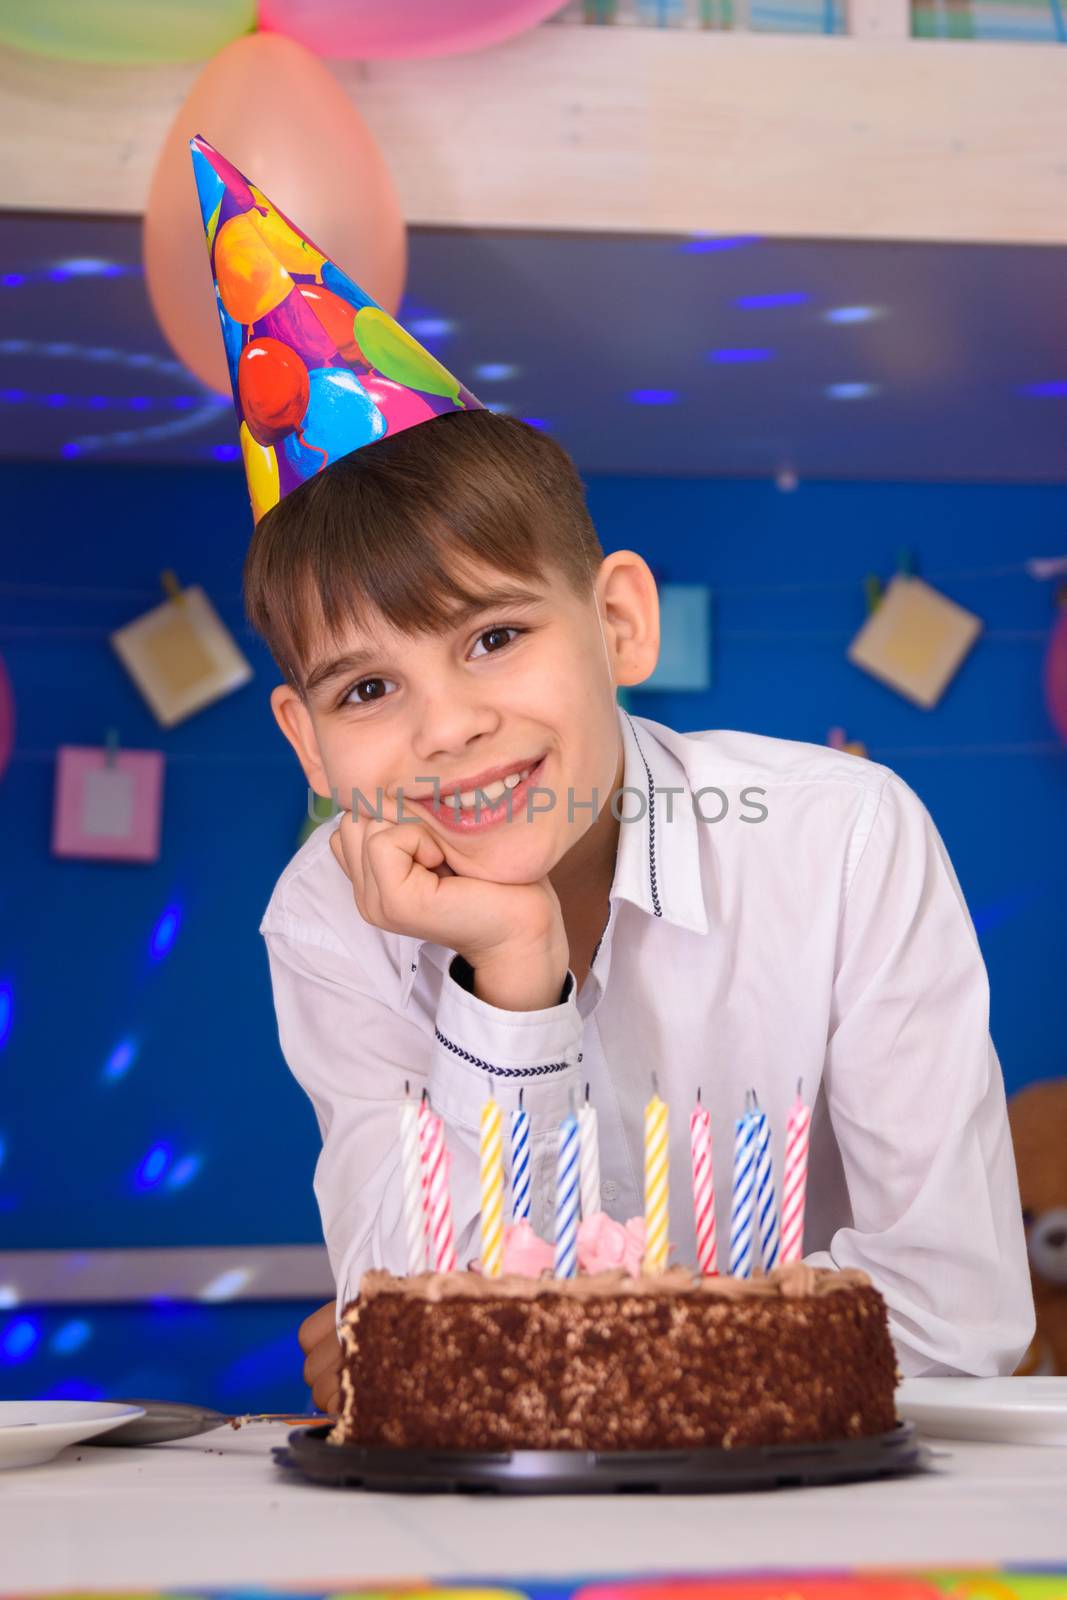 Portrait of the birthday boy at the birthday party